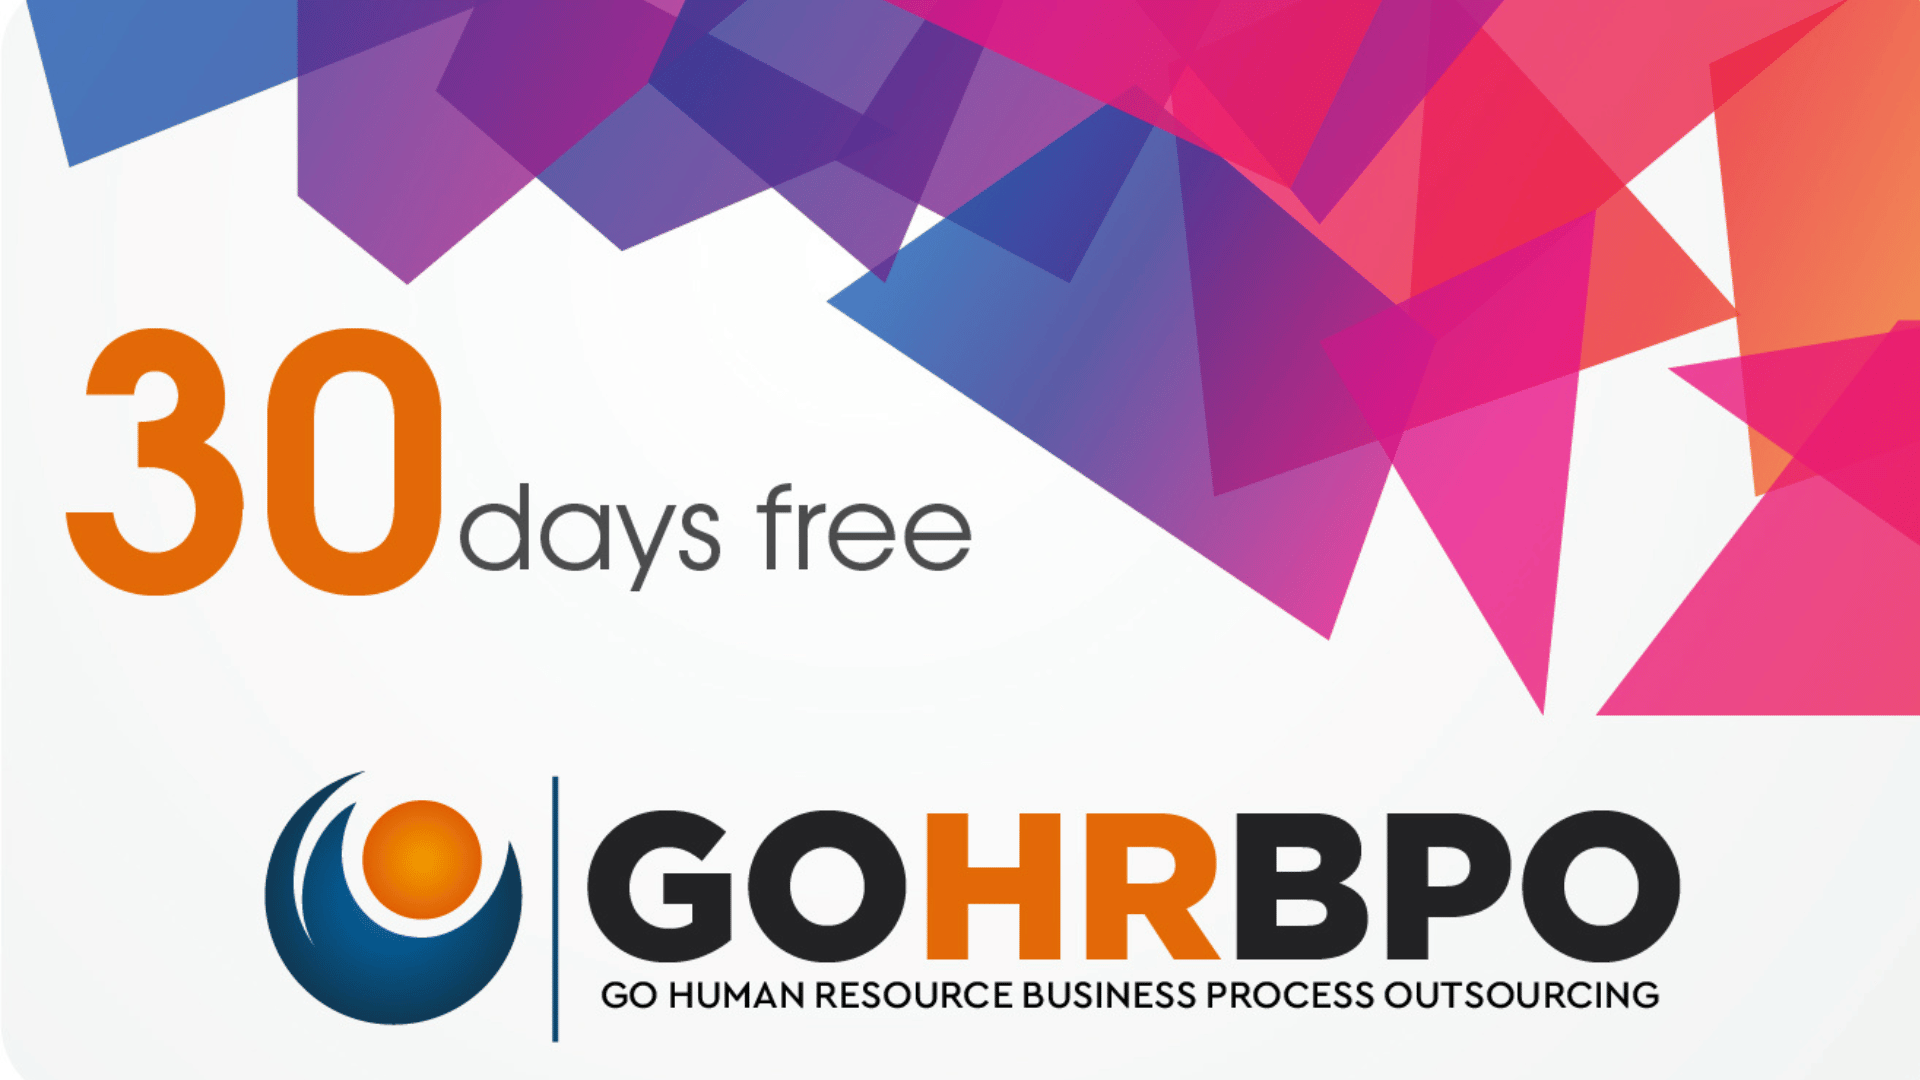 What’s New in GOHRBPO Payroll? Get 30 Days of FREE Payroll Outsourcing